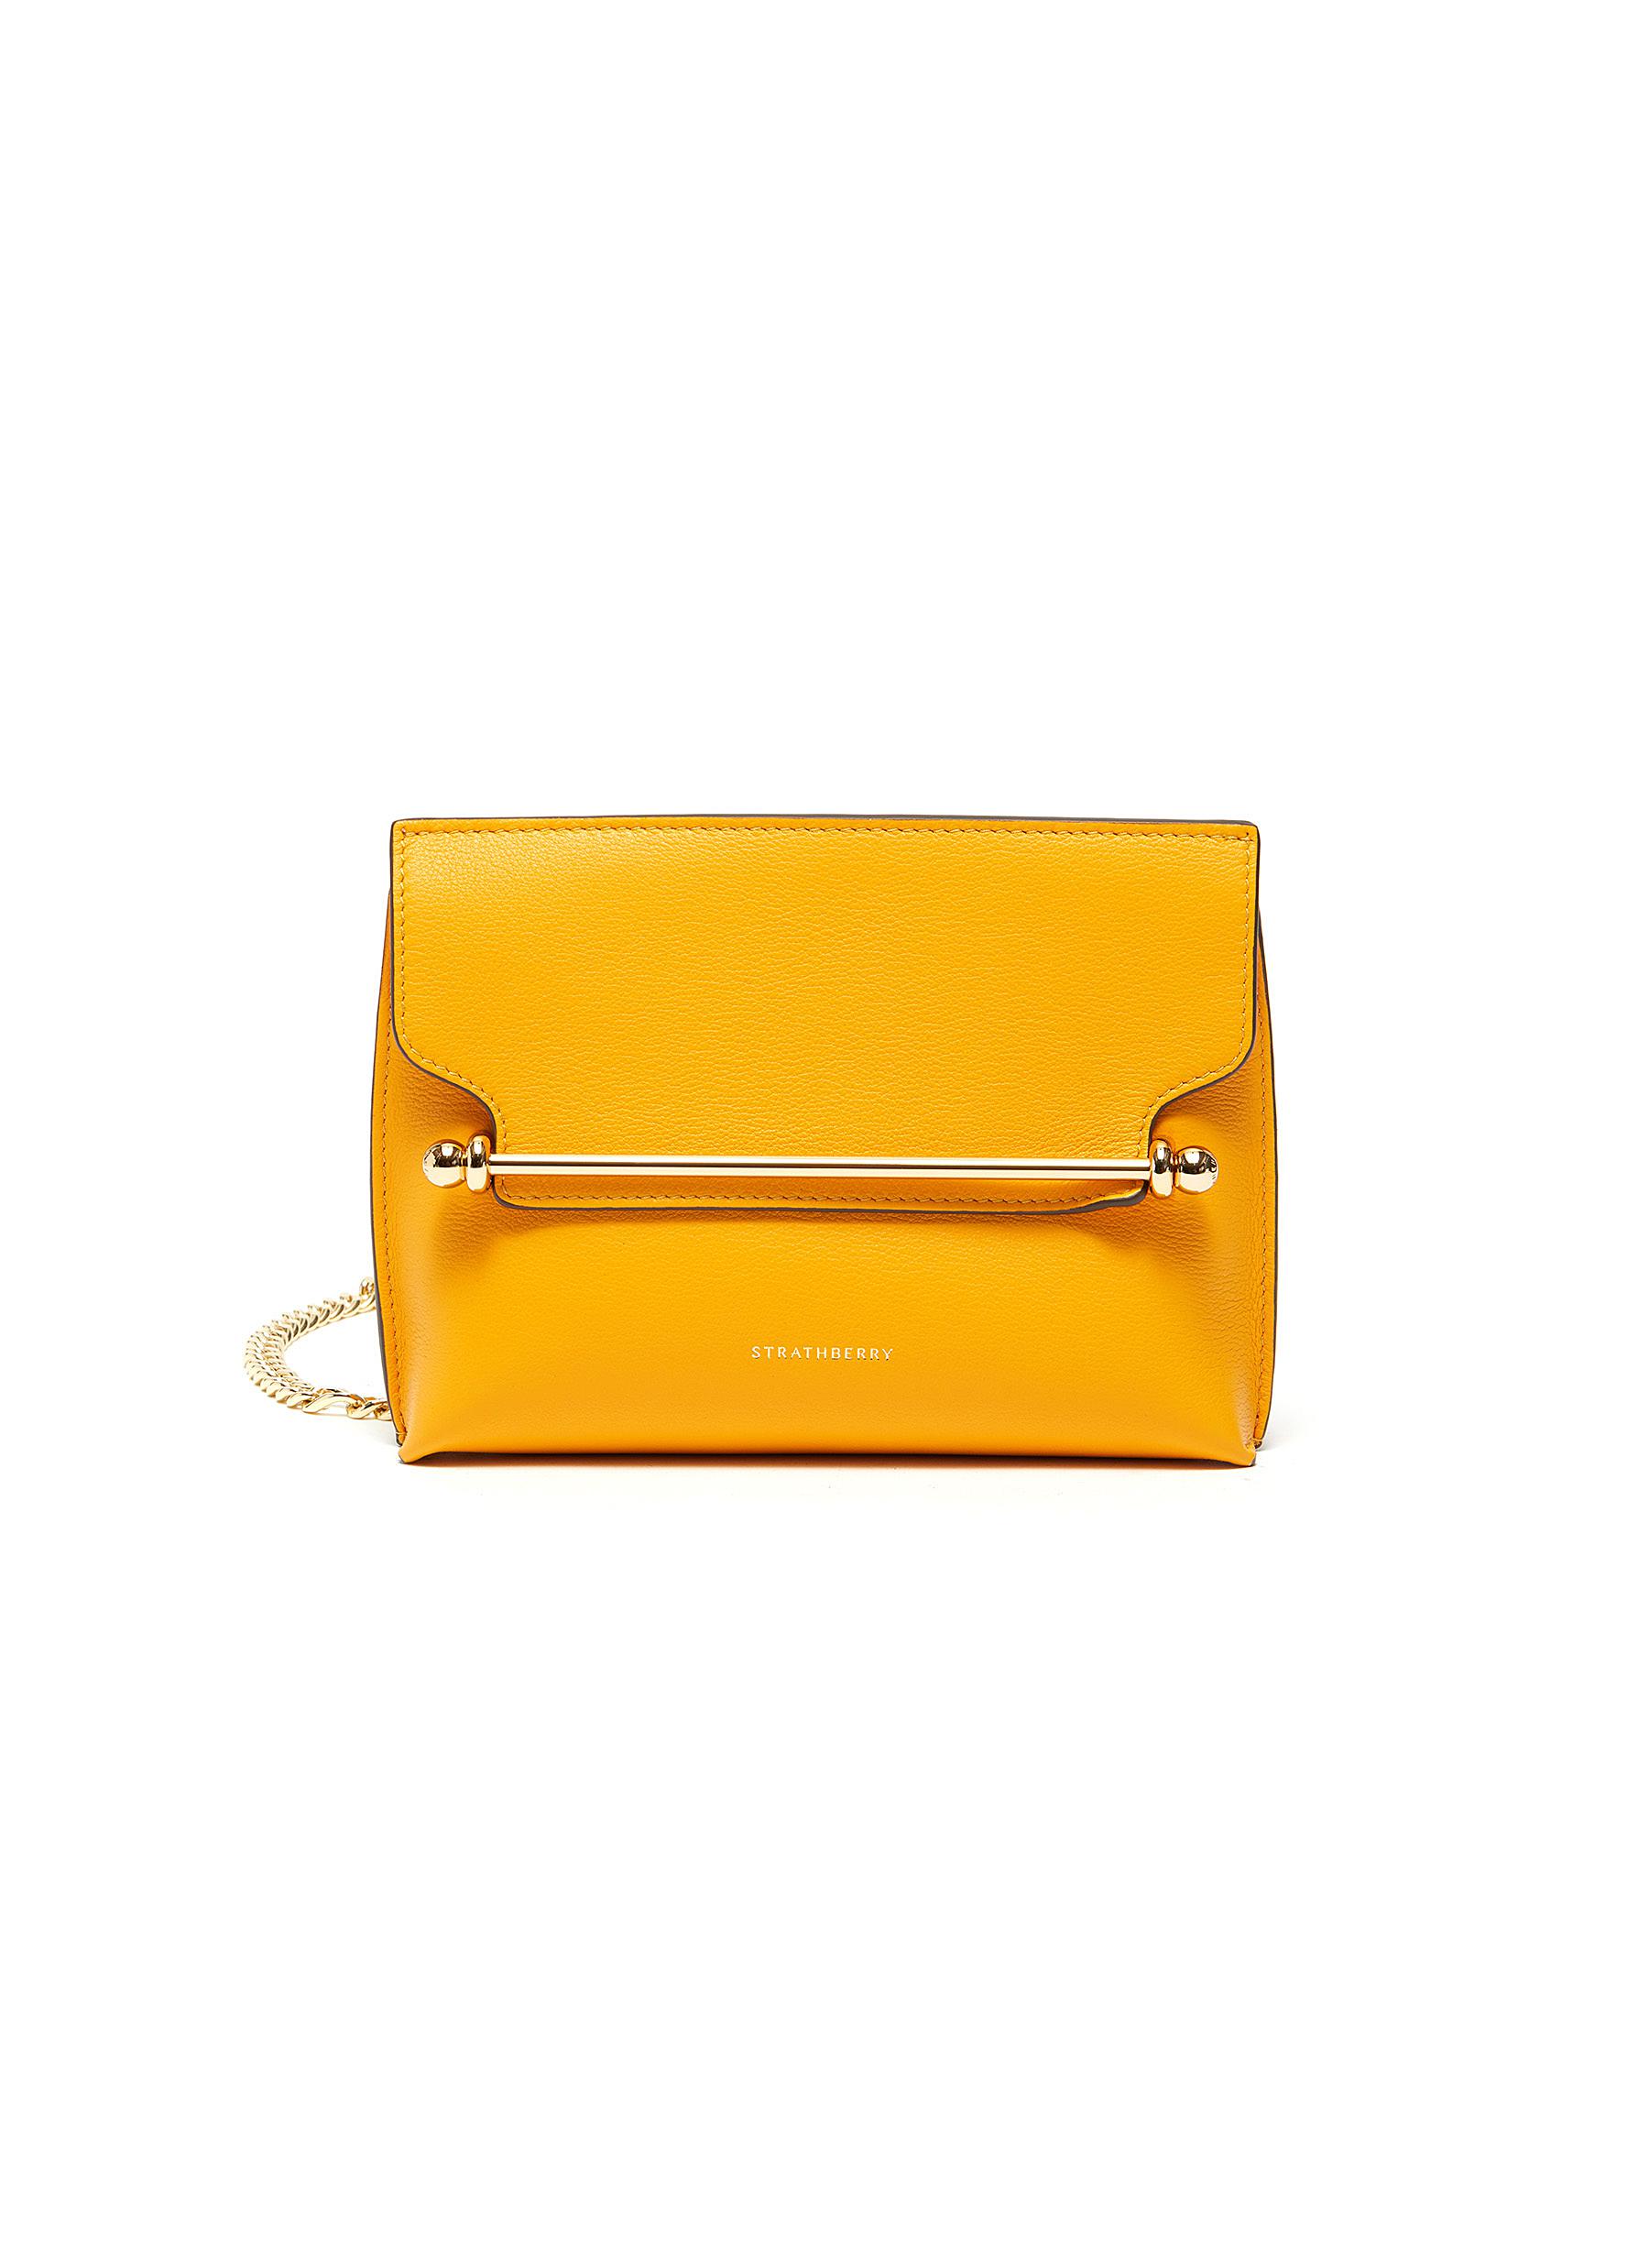 STRATHBERRY, 'East/West' stylist mini pouch, YELLOW, Women